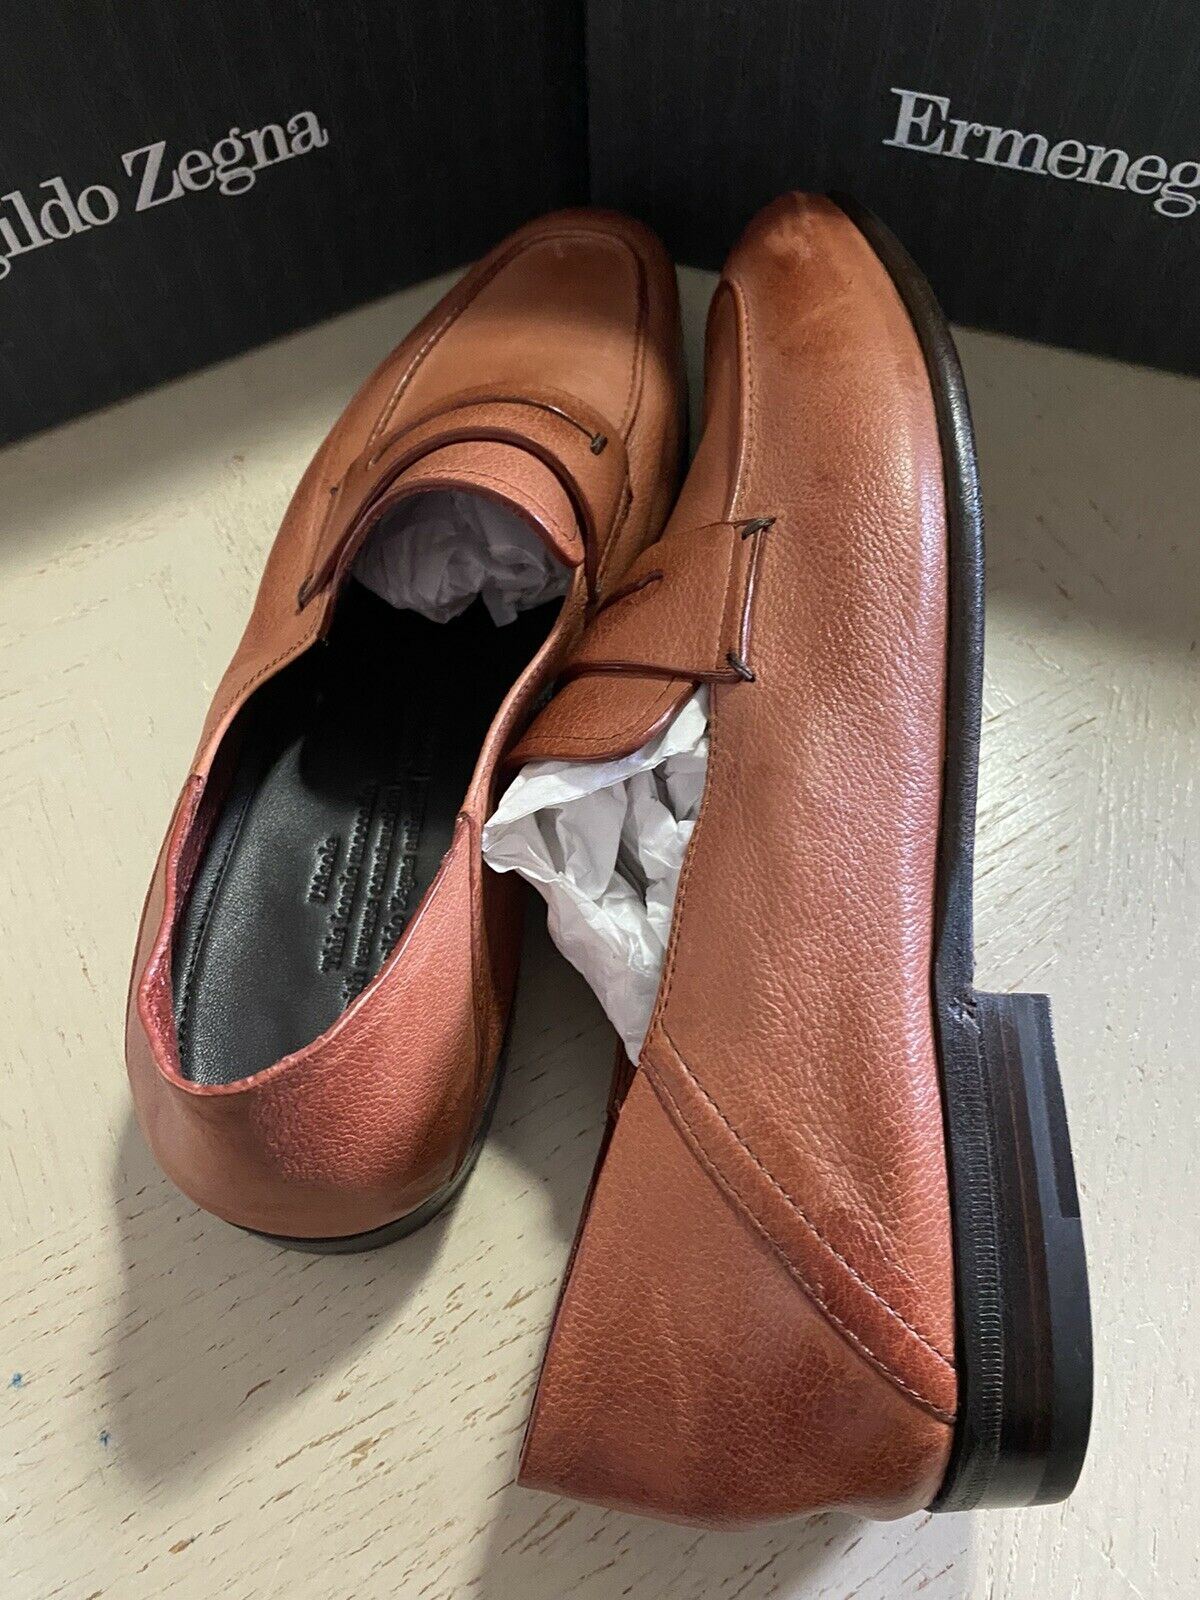 New $750 Ermenegildo Zegna Iconic Moccasin Leather Loafers Shoes Brown 10.5 US